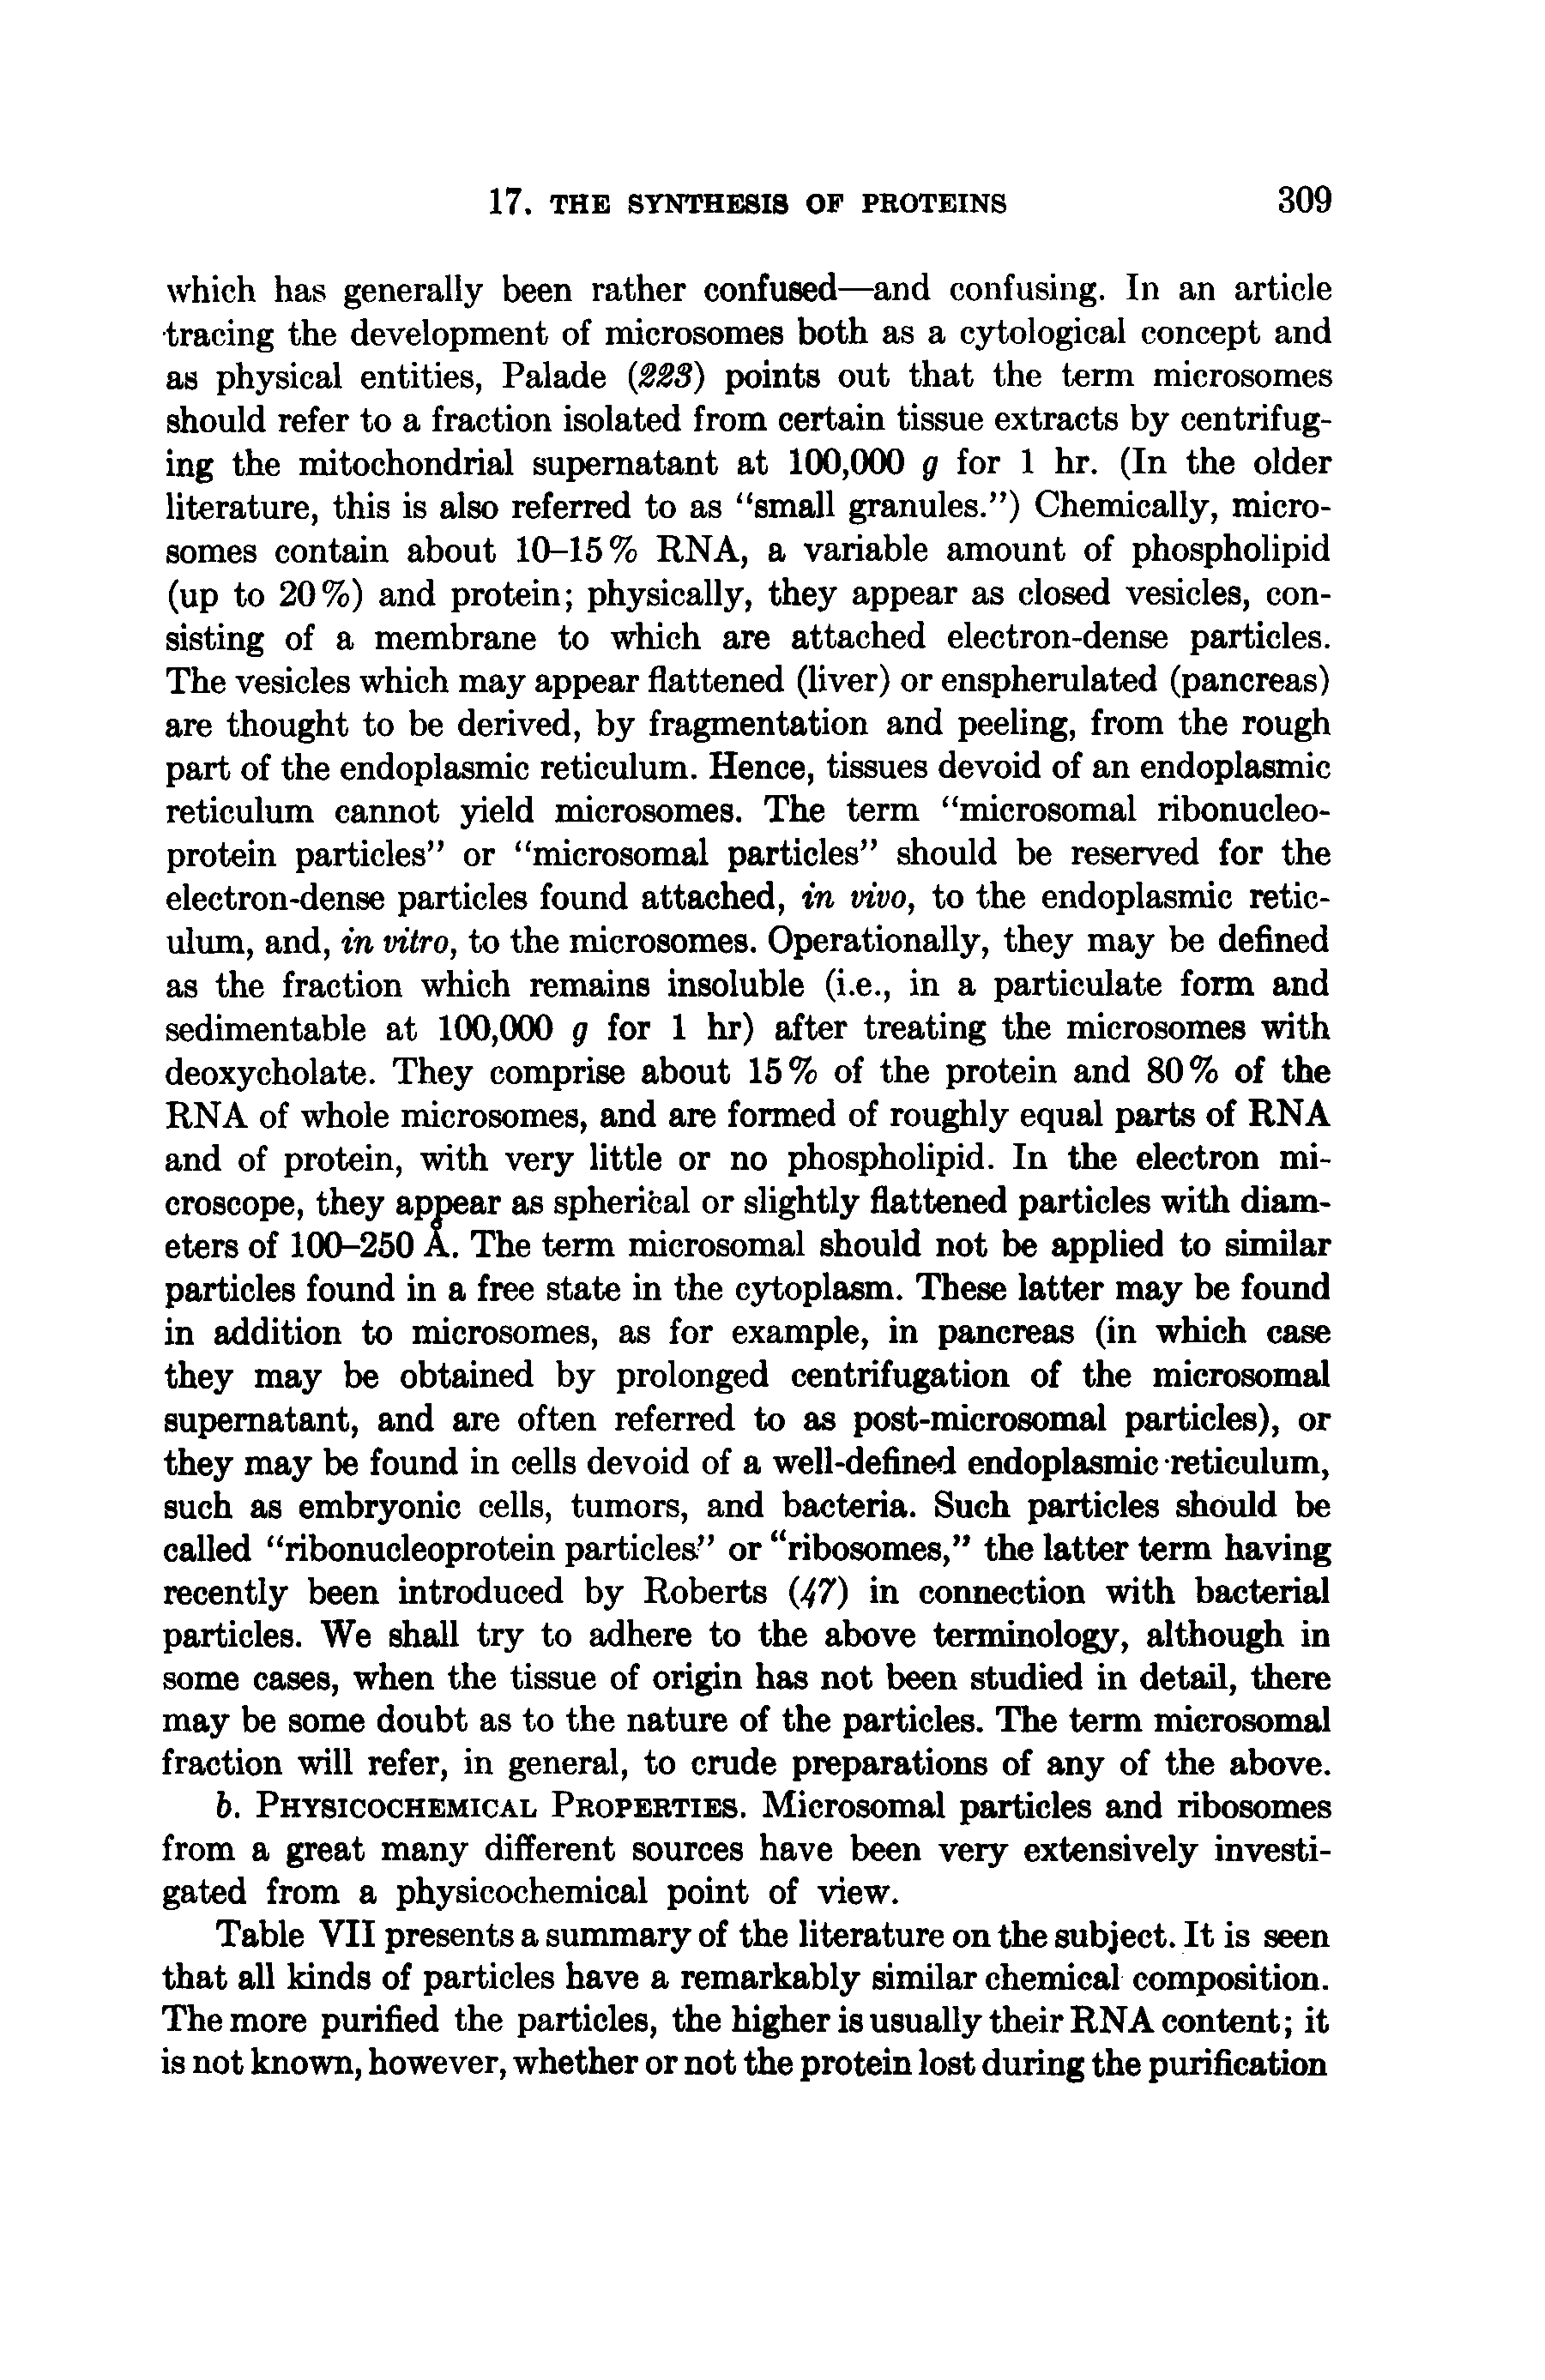 Table VII presents a summary of the literature on the subject. It is seen that all kinds of particles have a remarkably similar chemical composition. The more purified the particles, the higher is usually their RNA content it is not known, however, whether or not the protein lost during the purification...